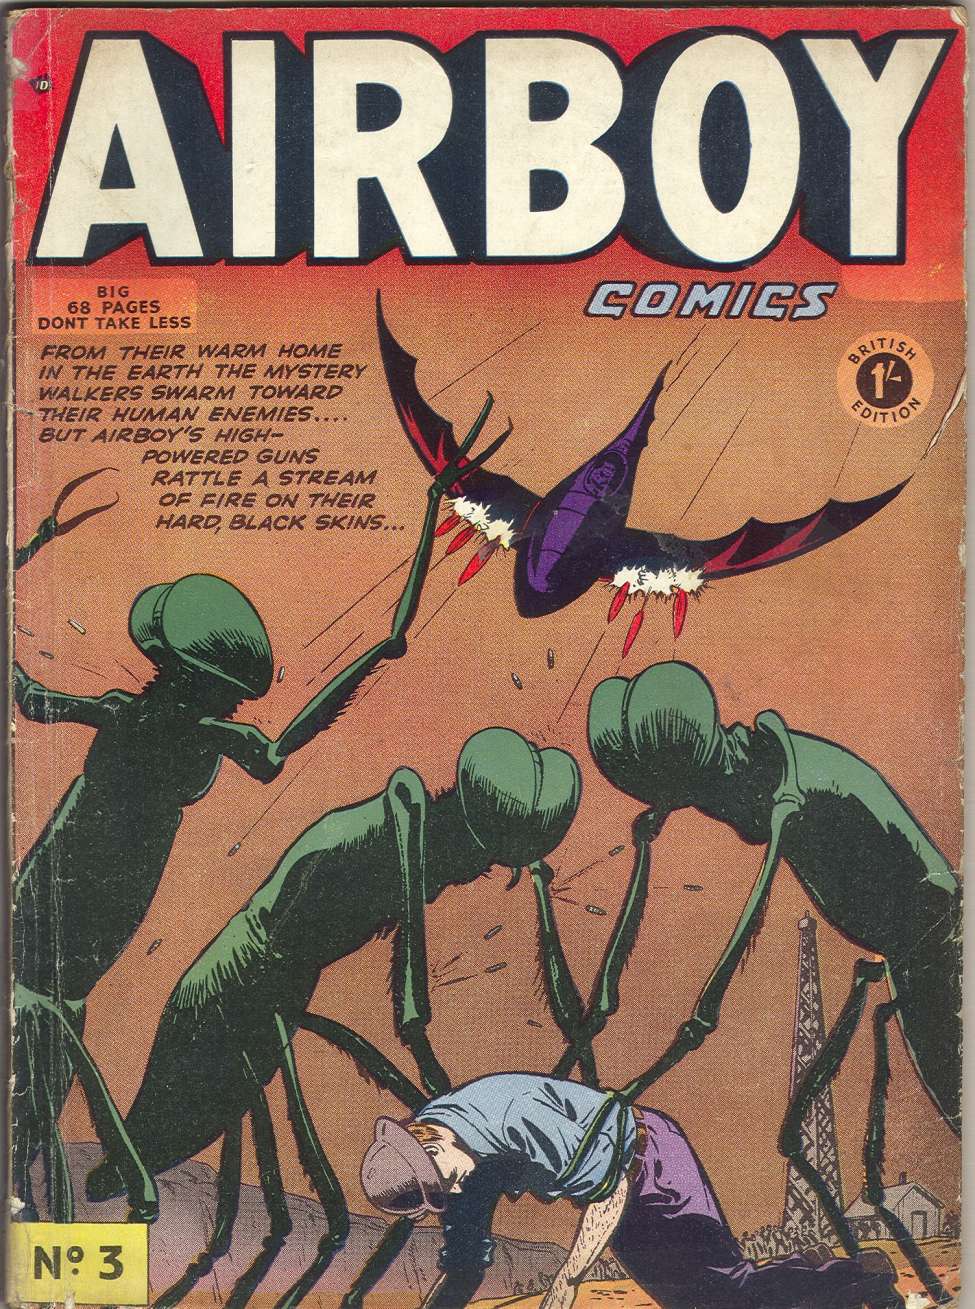 Book Cover For Airboy Comics 3